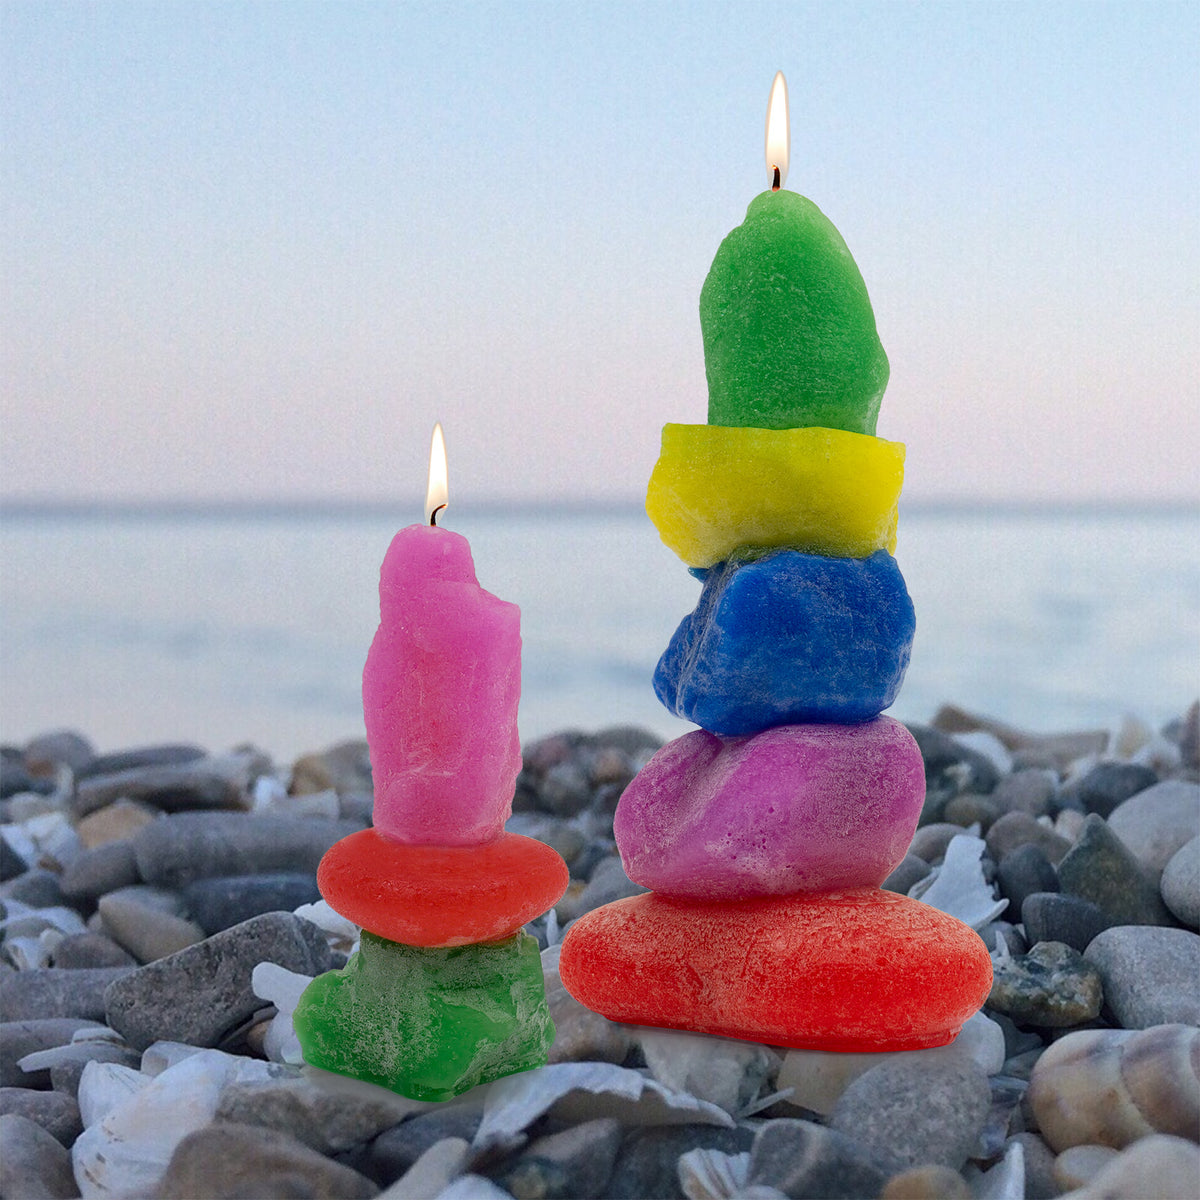 Cairn Candles